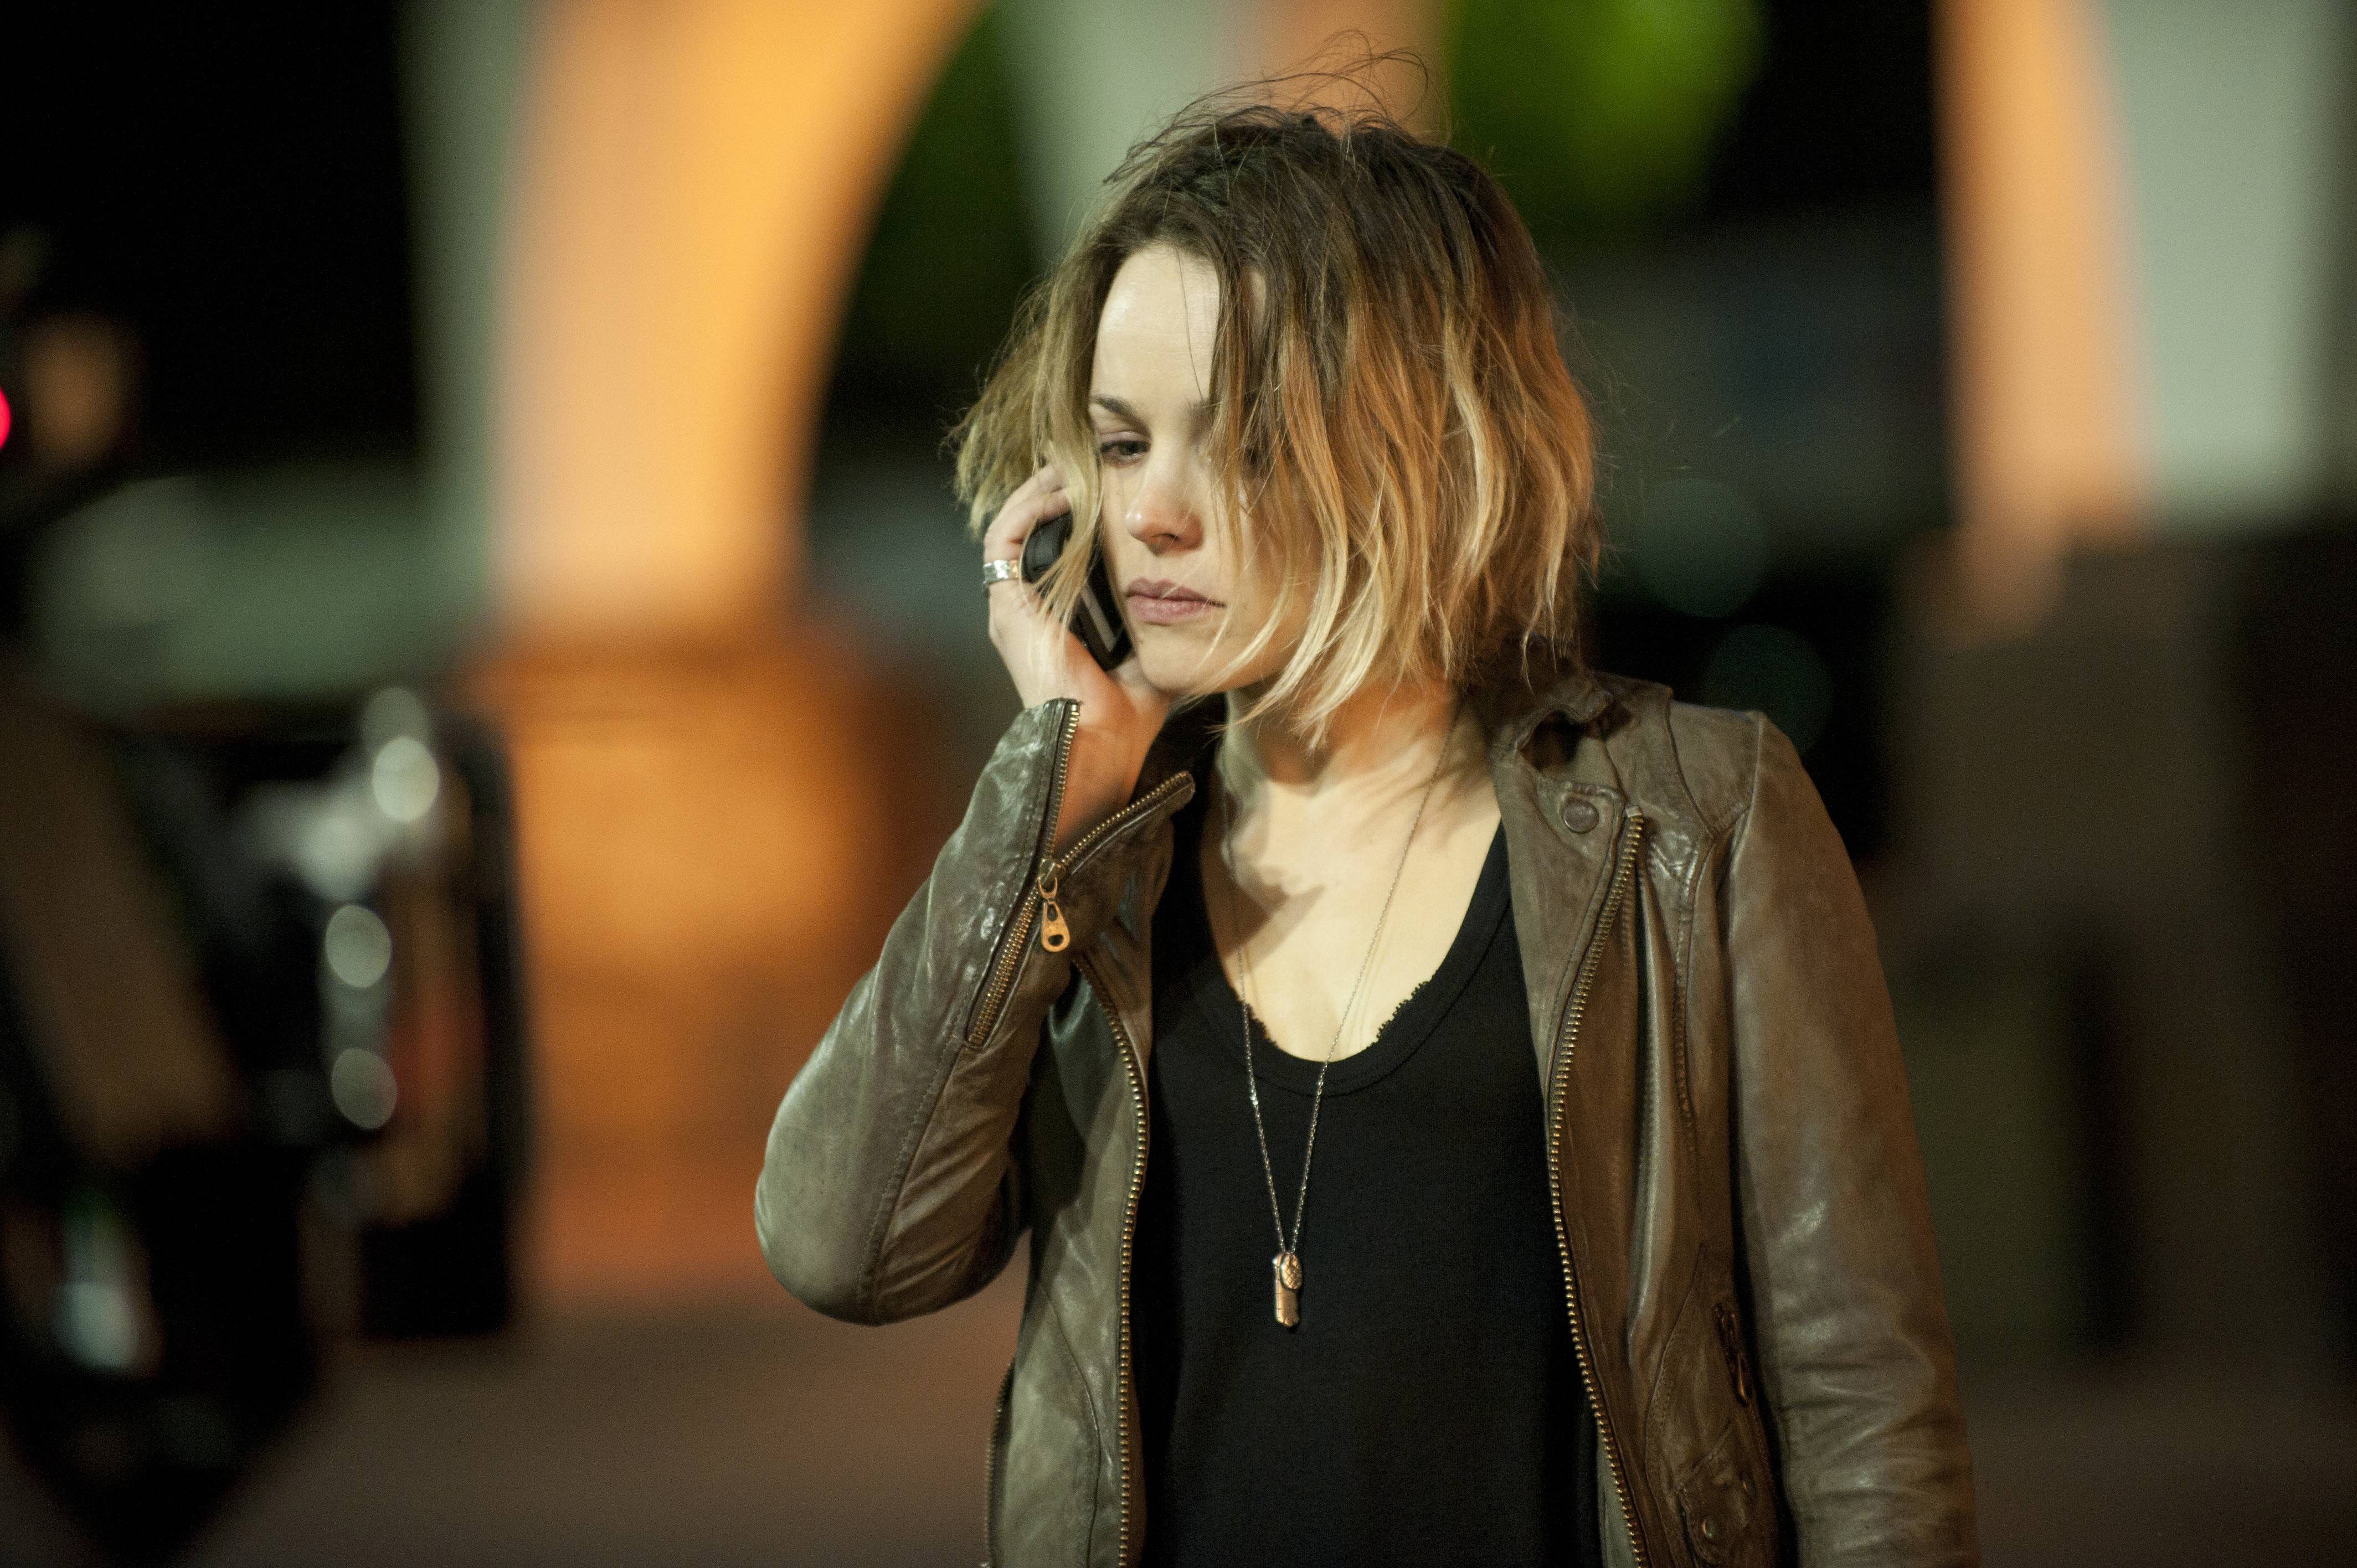 Female Sleuths In Books To Rival Ani Bezzerides In 'True Detective'